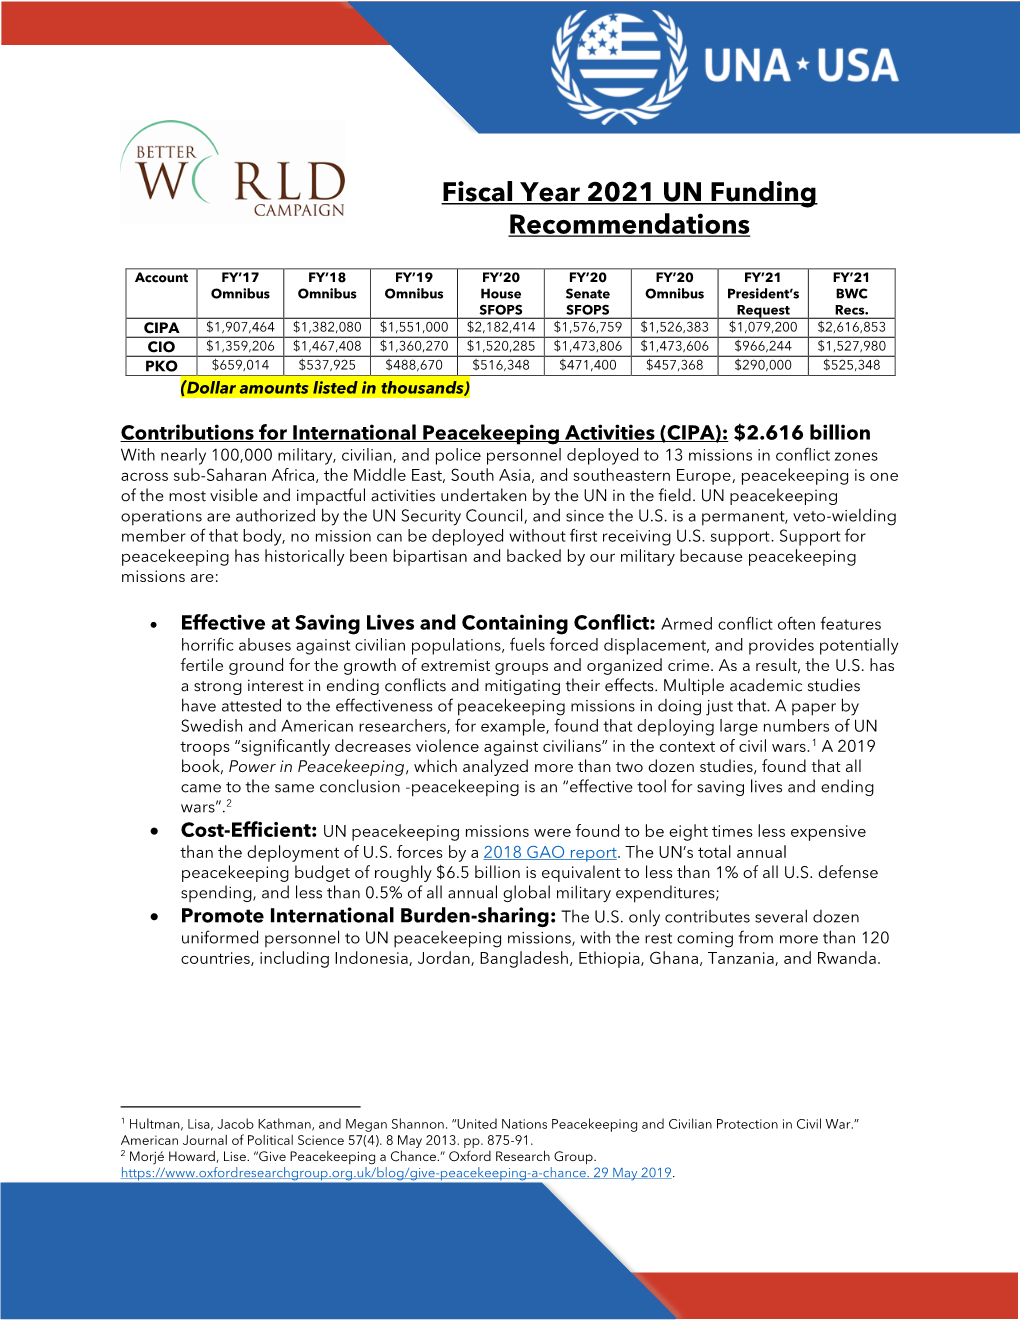 Fiscal Year 2021 UN Funding Recommendations